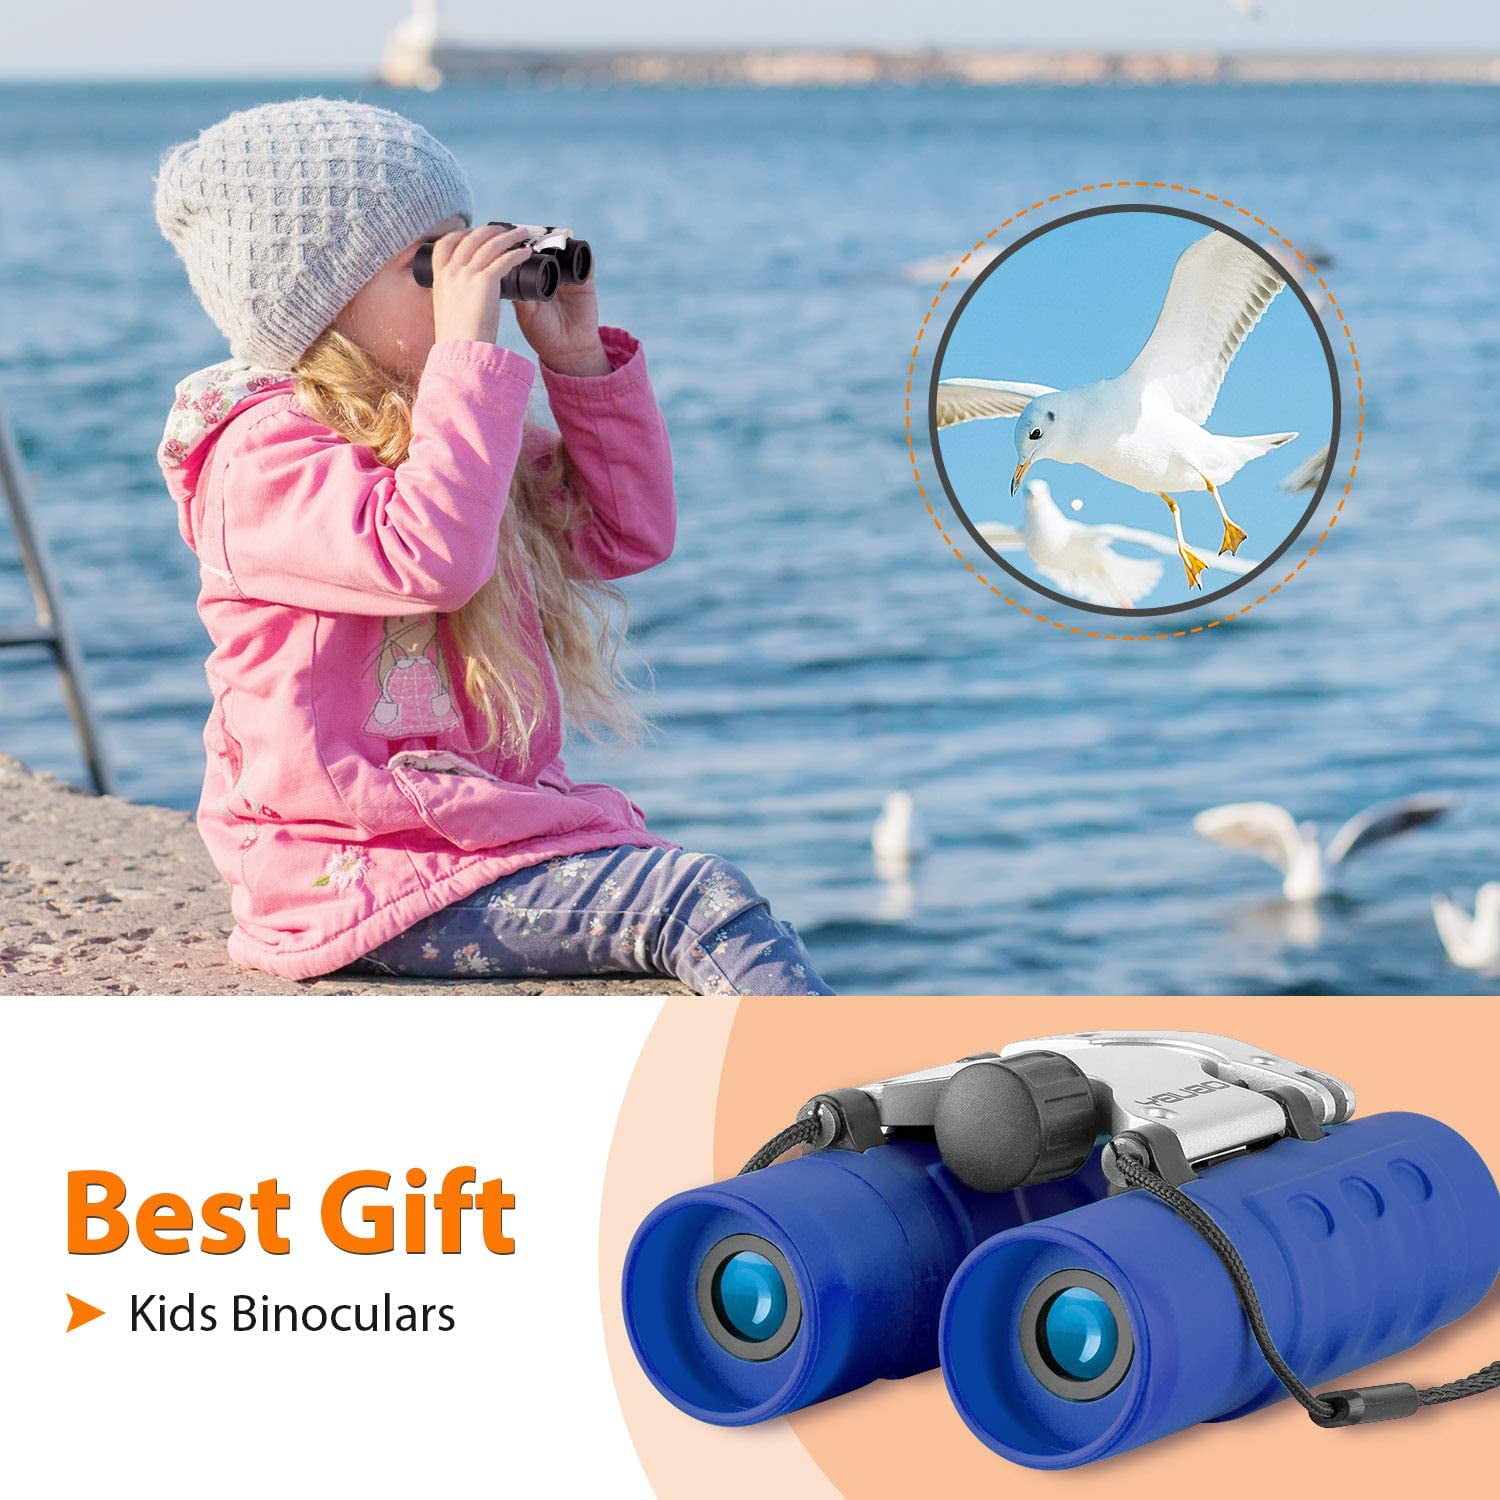 Compact Shock Proof Binoculars for Kids 8x21 with High-Resolution Real Optics Best Gift for Boys & Girls Toys 3-12 Year Old